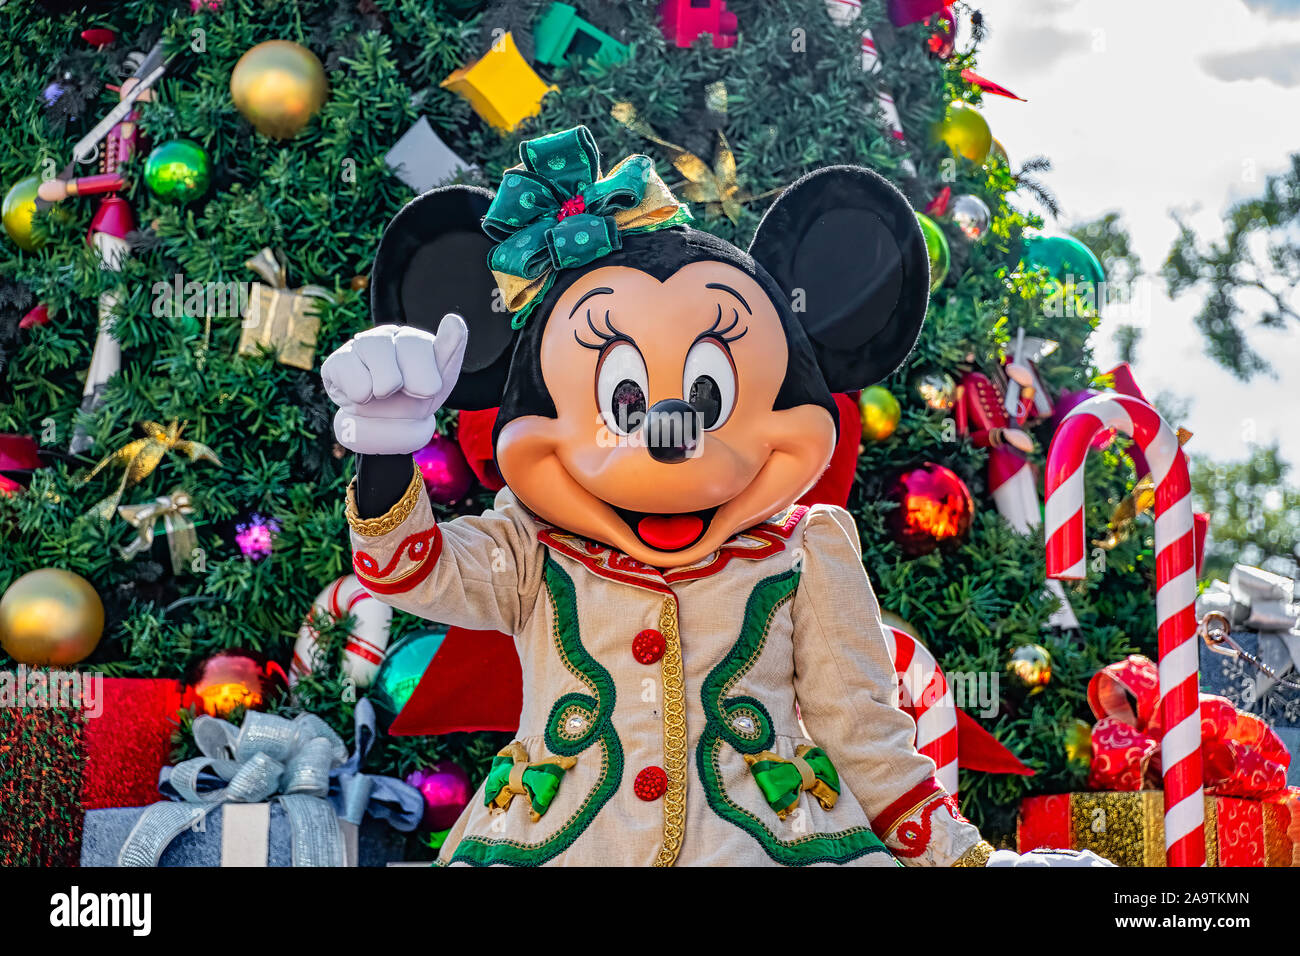 Minnie Mouse in Christmas outfits in the Christmastime Parade Stock Photo